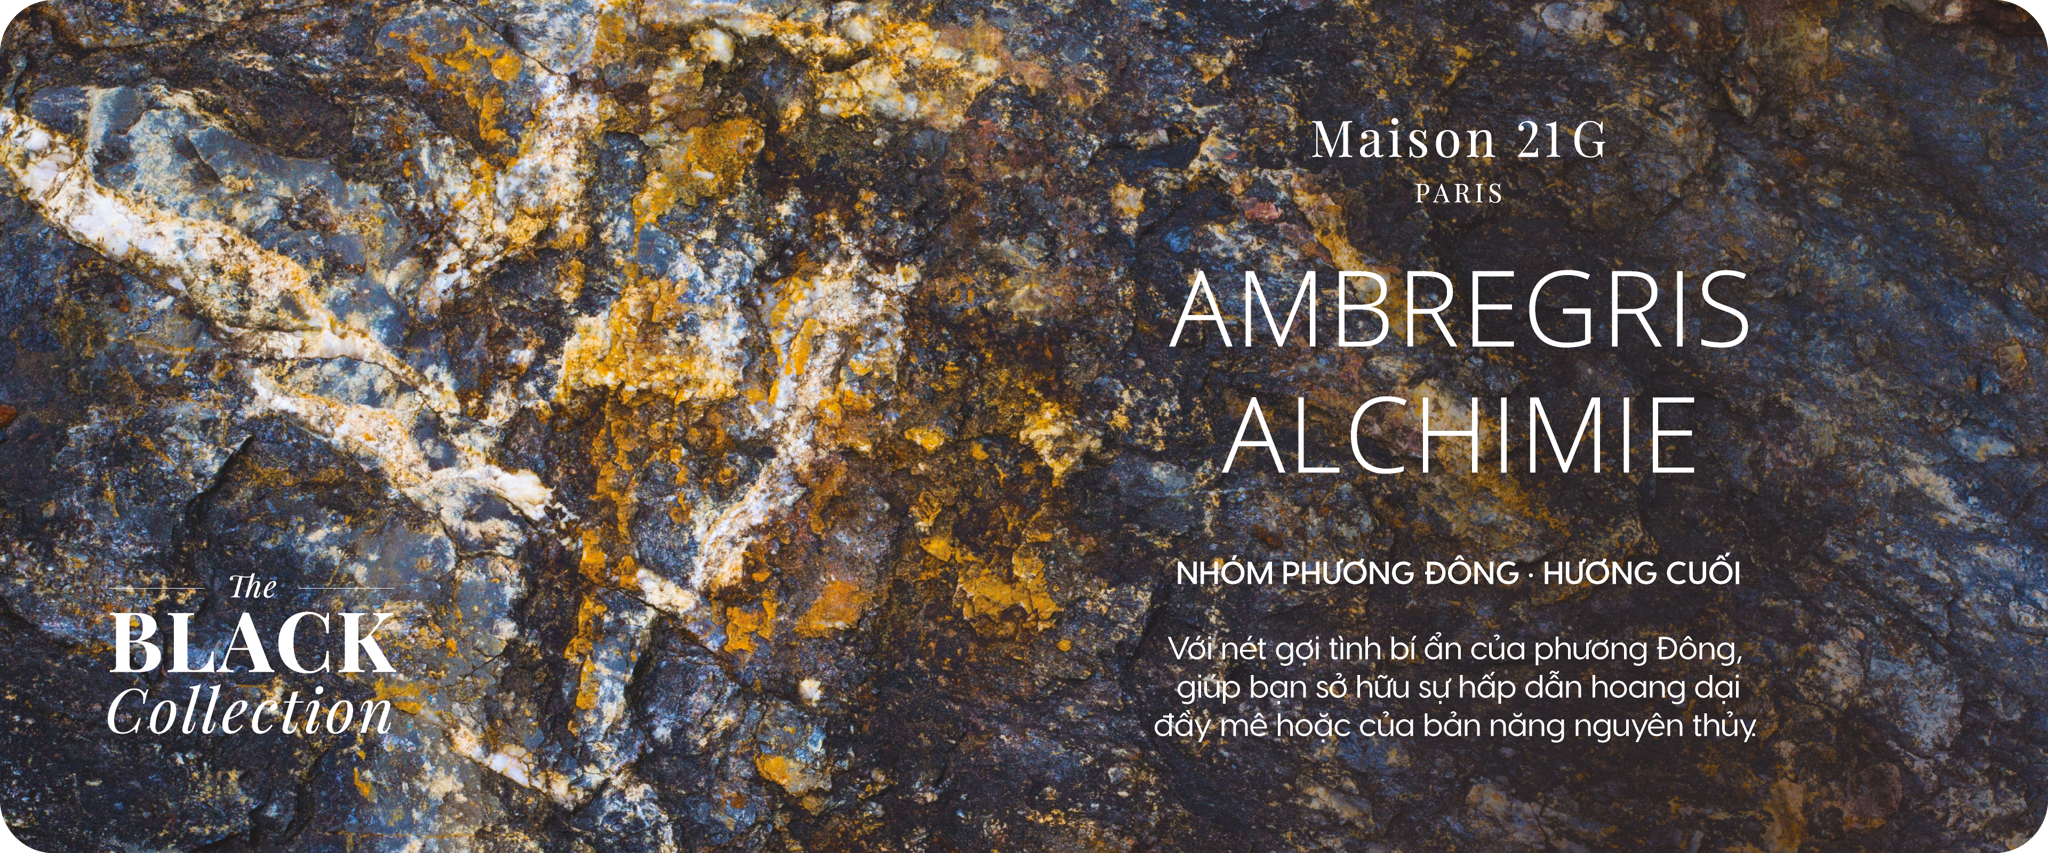 Ambergris Alchimie | Black Collection